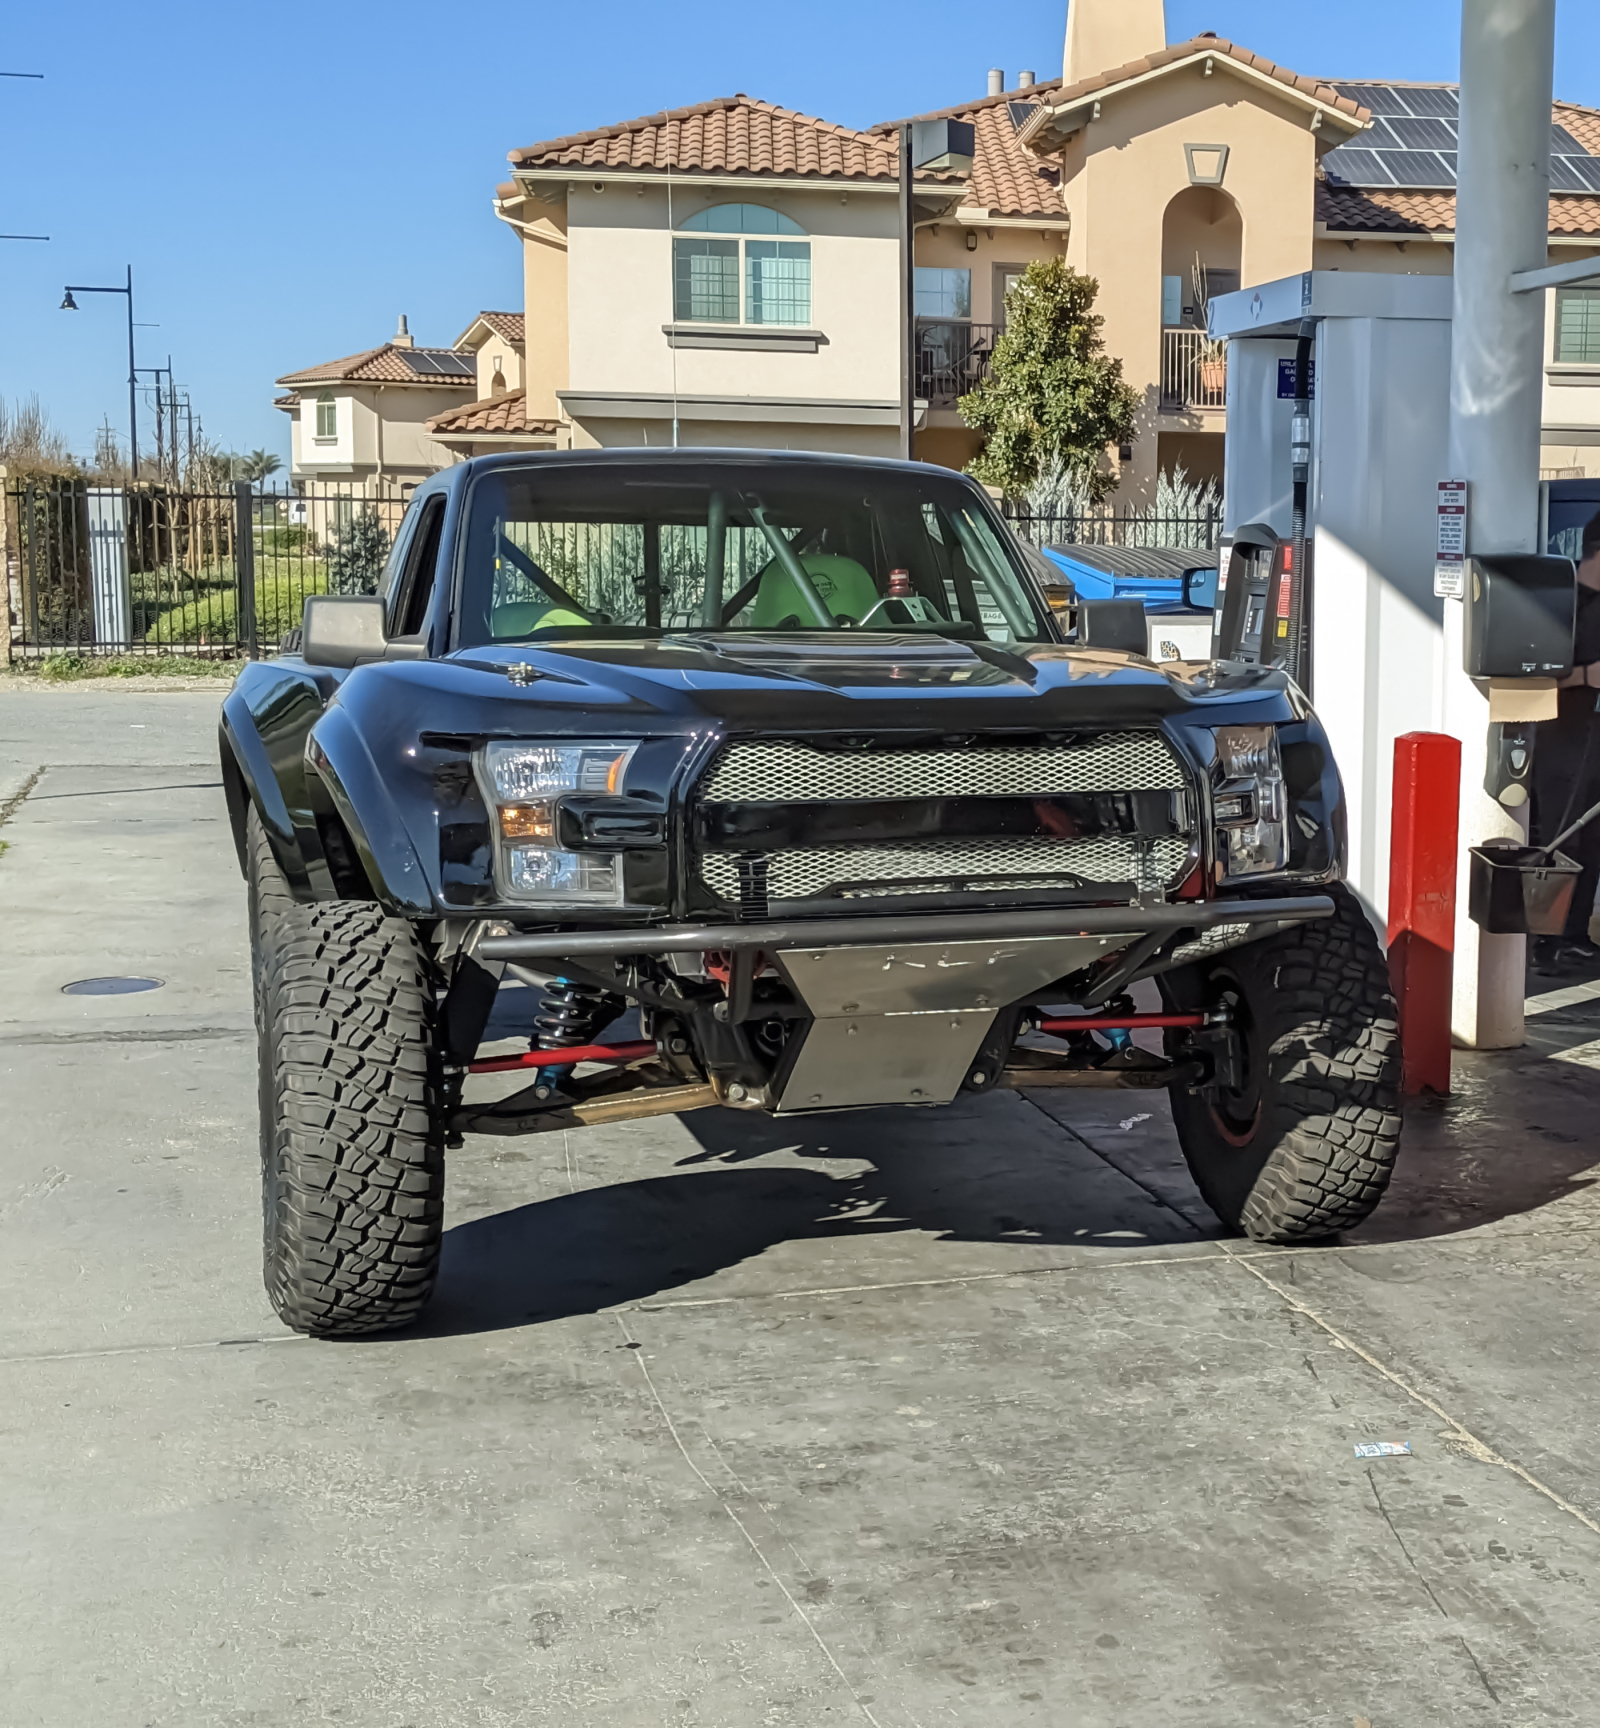 For Sale: SCORE-tagged 4-Link Ford Prerunner - Professional Build, New Parts, Well Maintained, and Turnkey - photo1